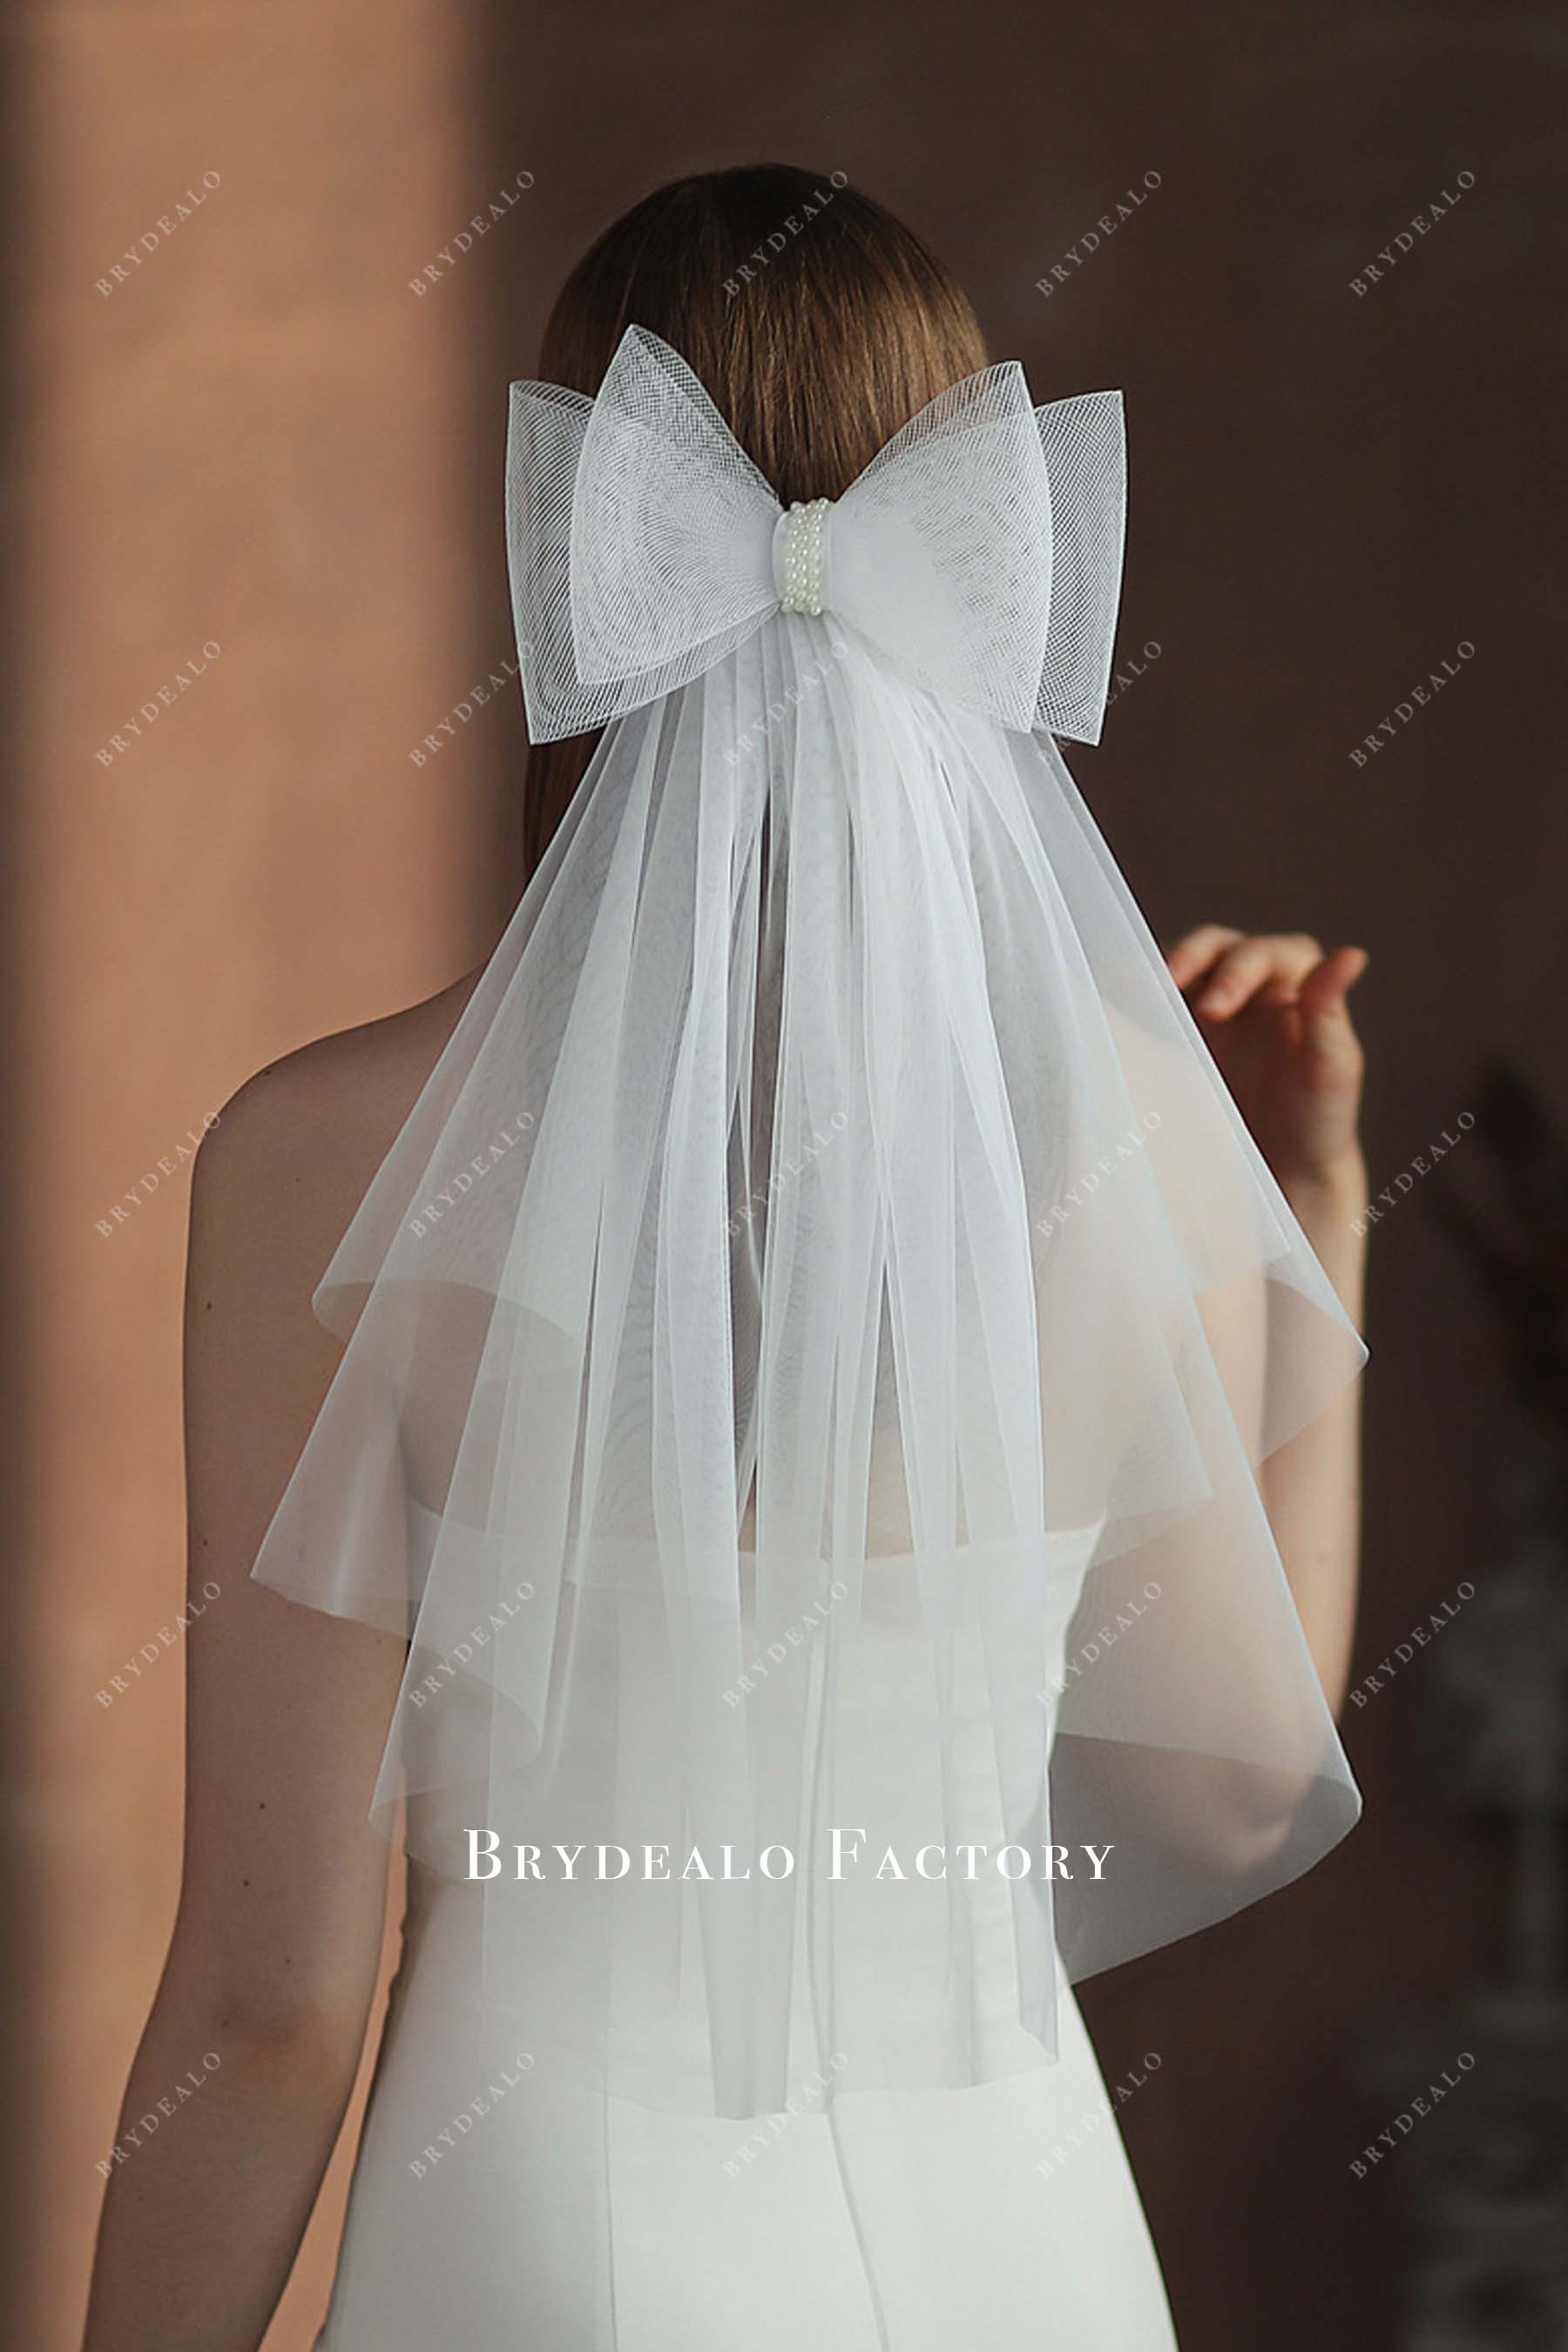 Cute Tulle Bow Two Tiers Elbow Length Veil